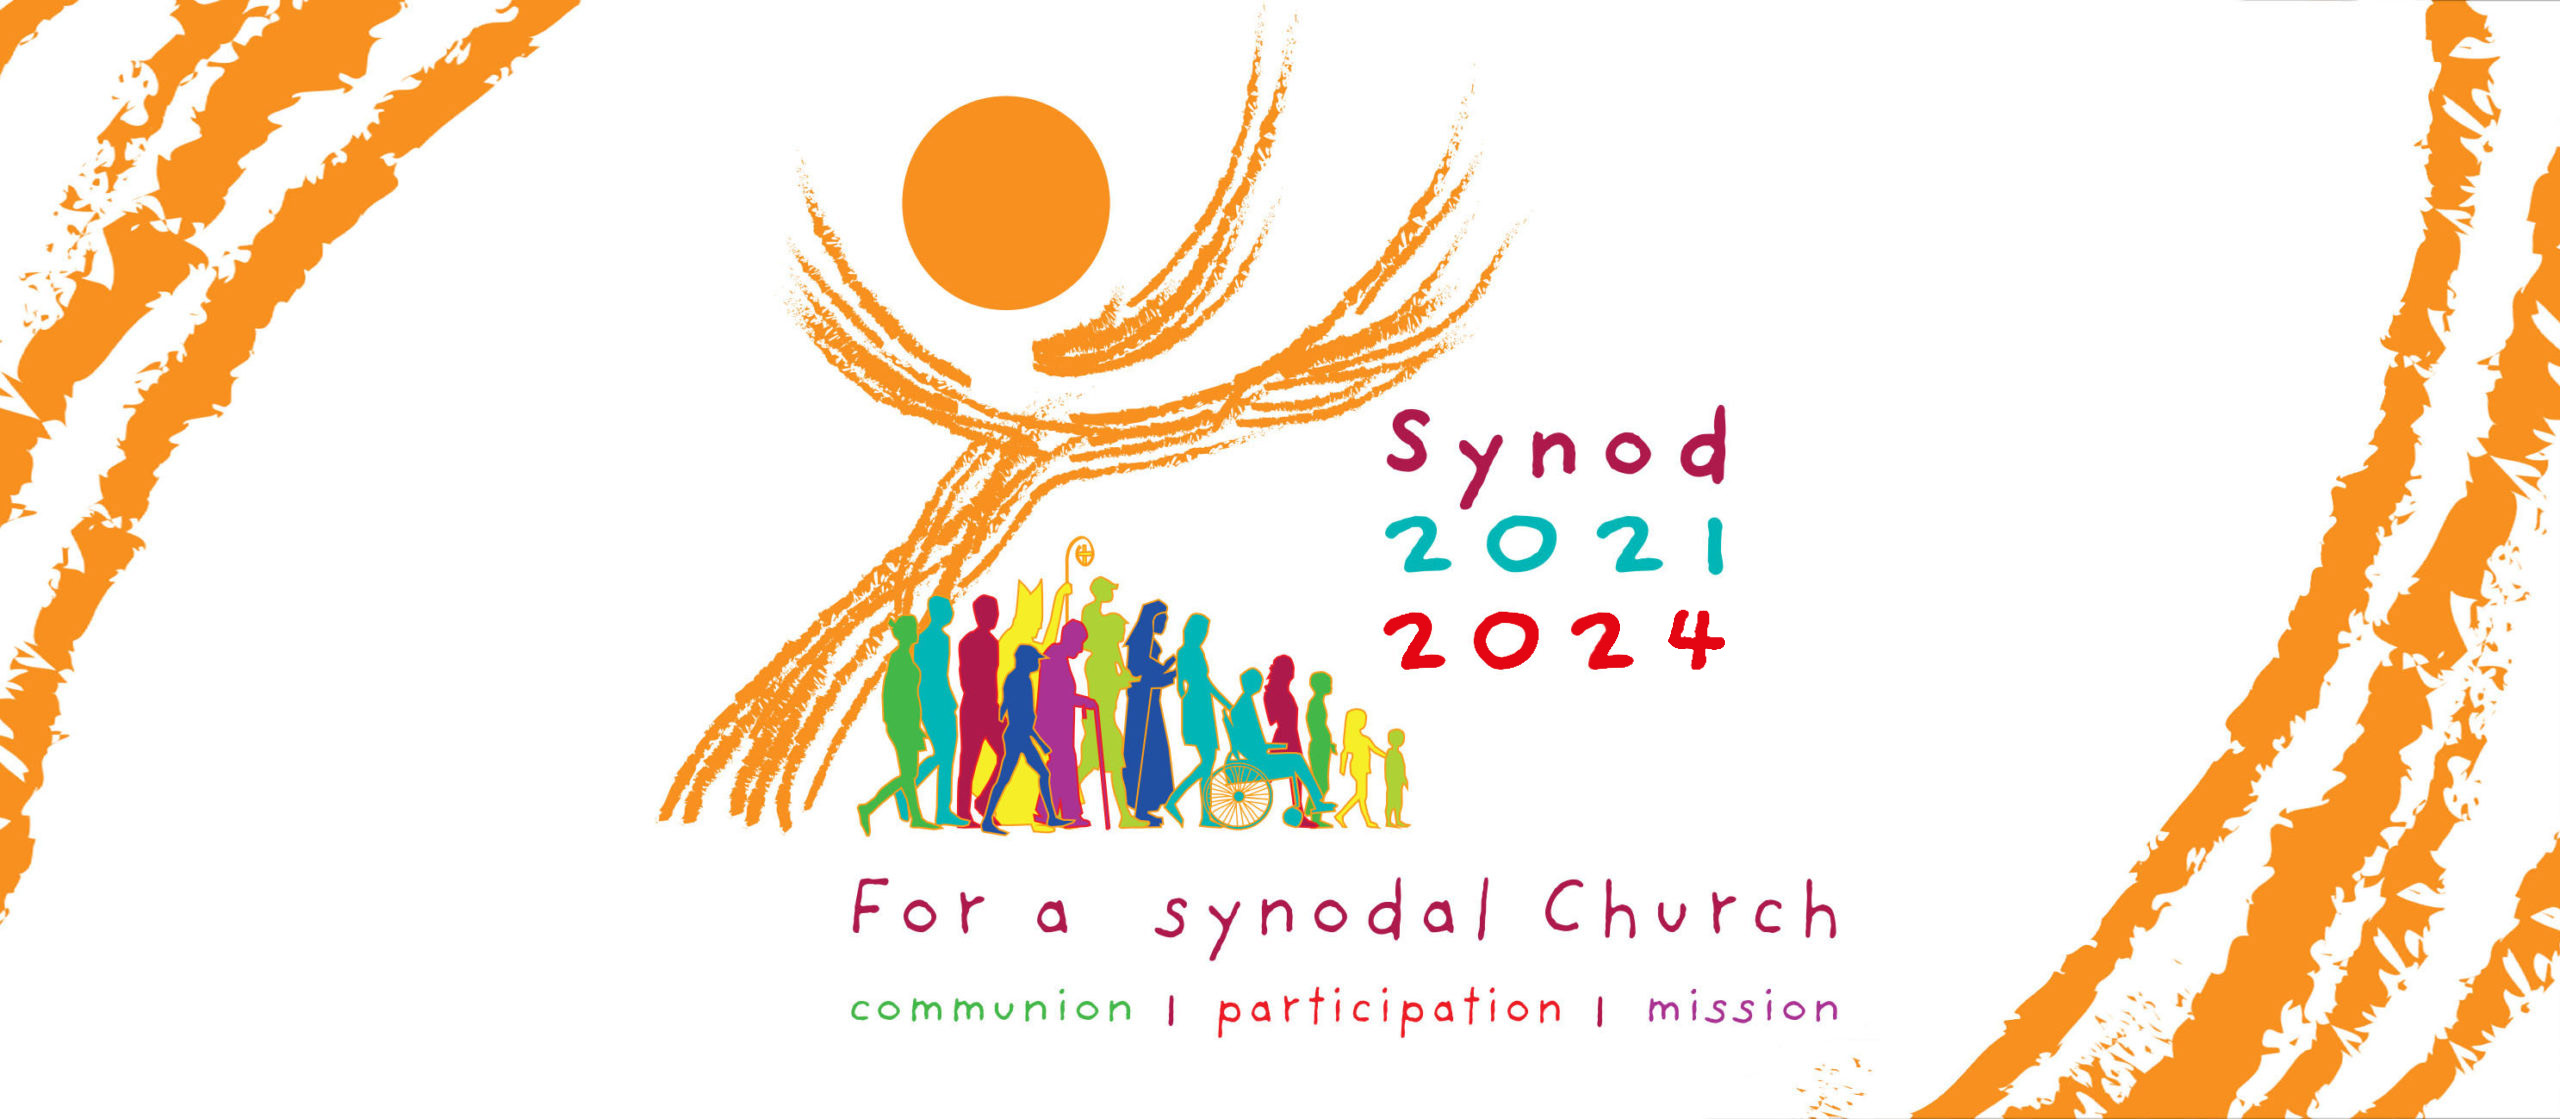 North American Delegates to the October 2023 Synod Session Announced